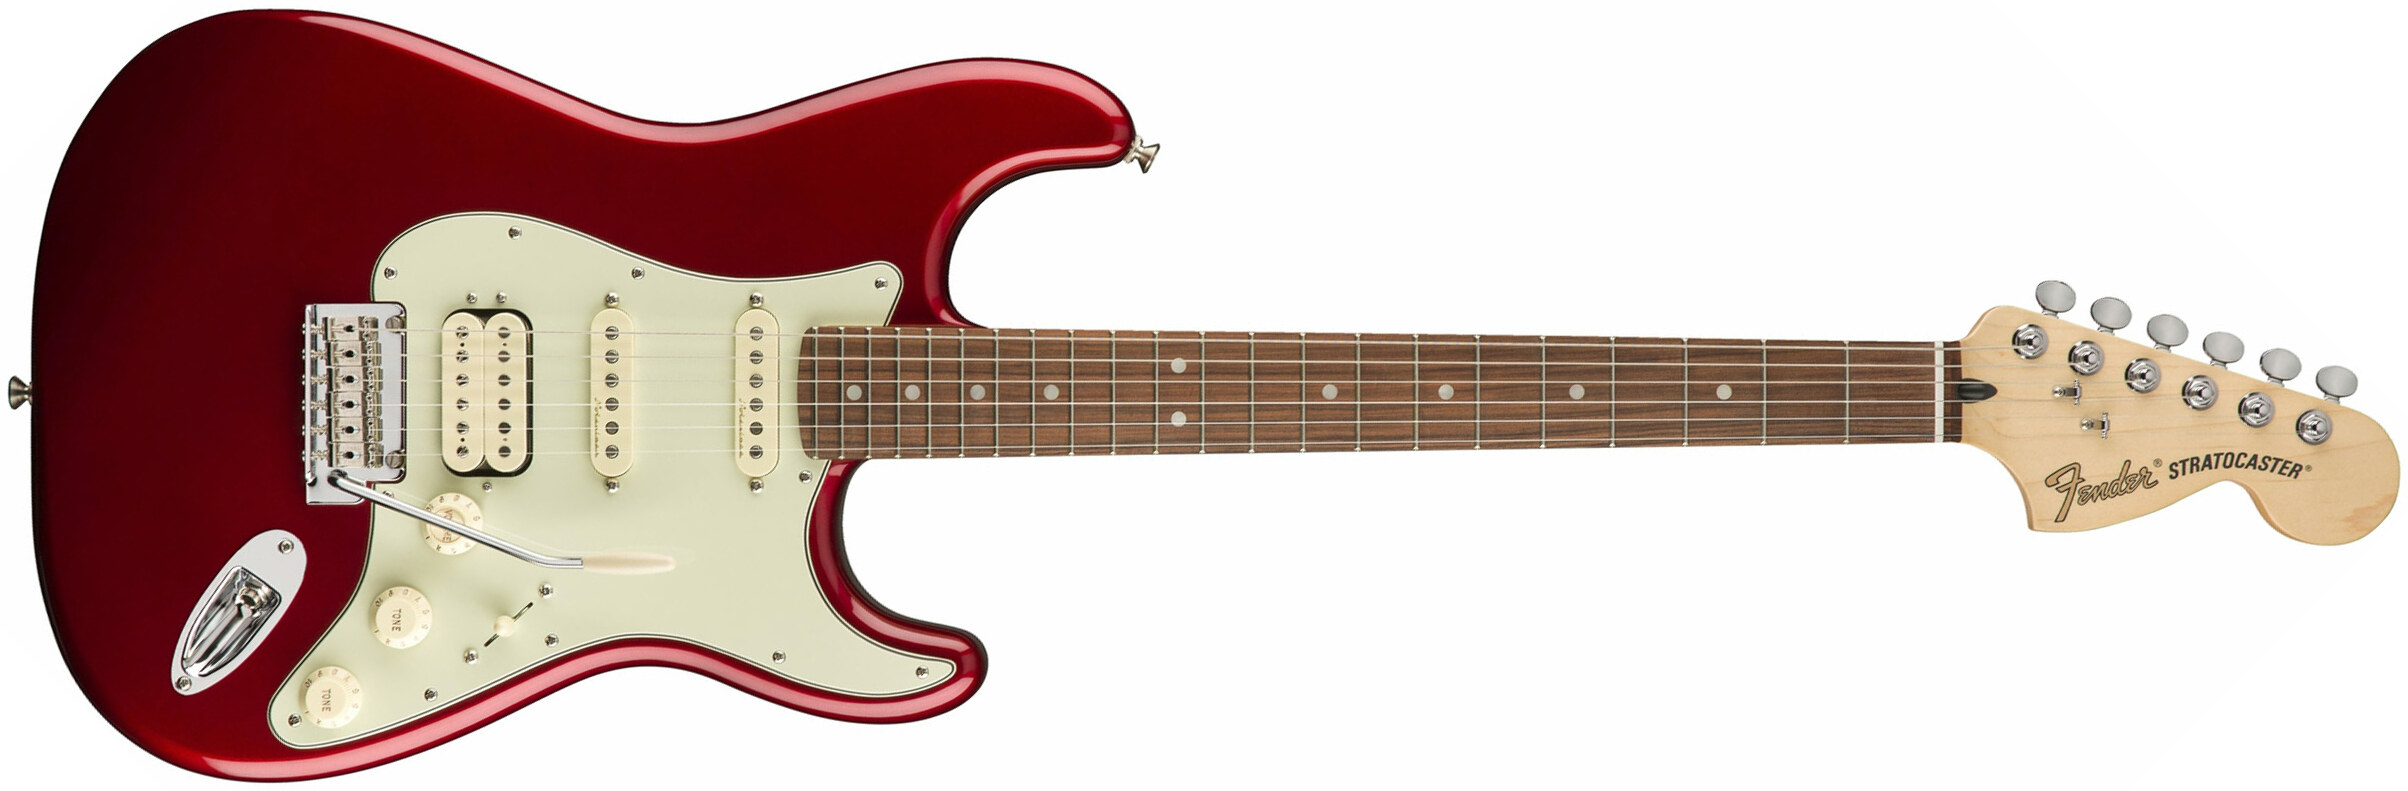 Fender Strat Deluxe Hss Mex Pf 2017 - Candy Apple Red - Str shape electric guitar - Main picture